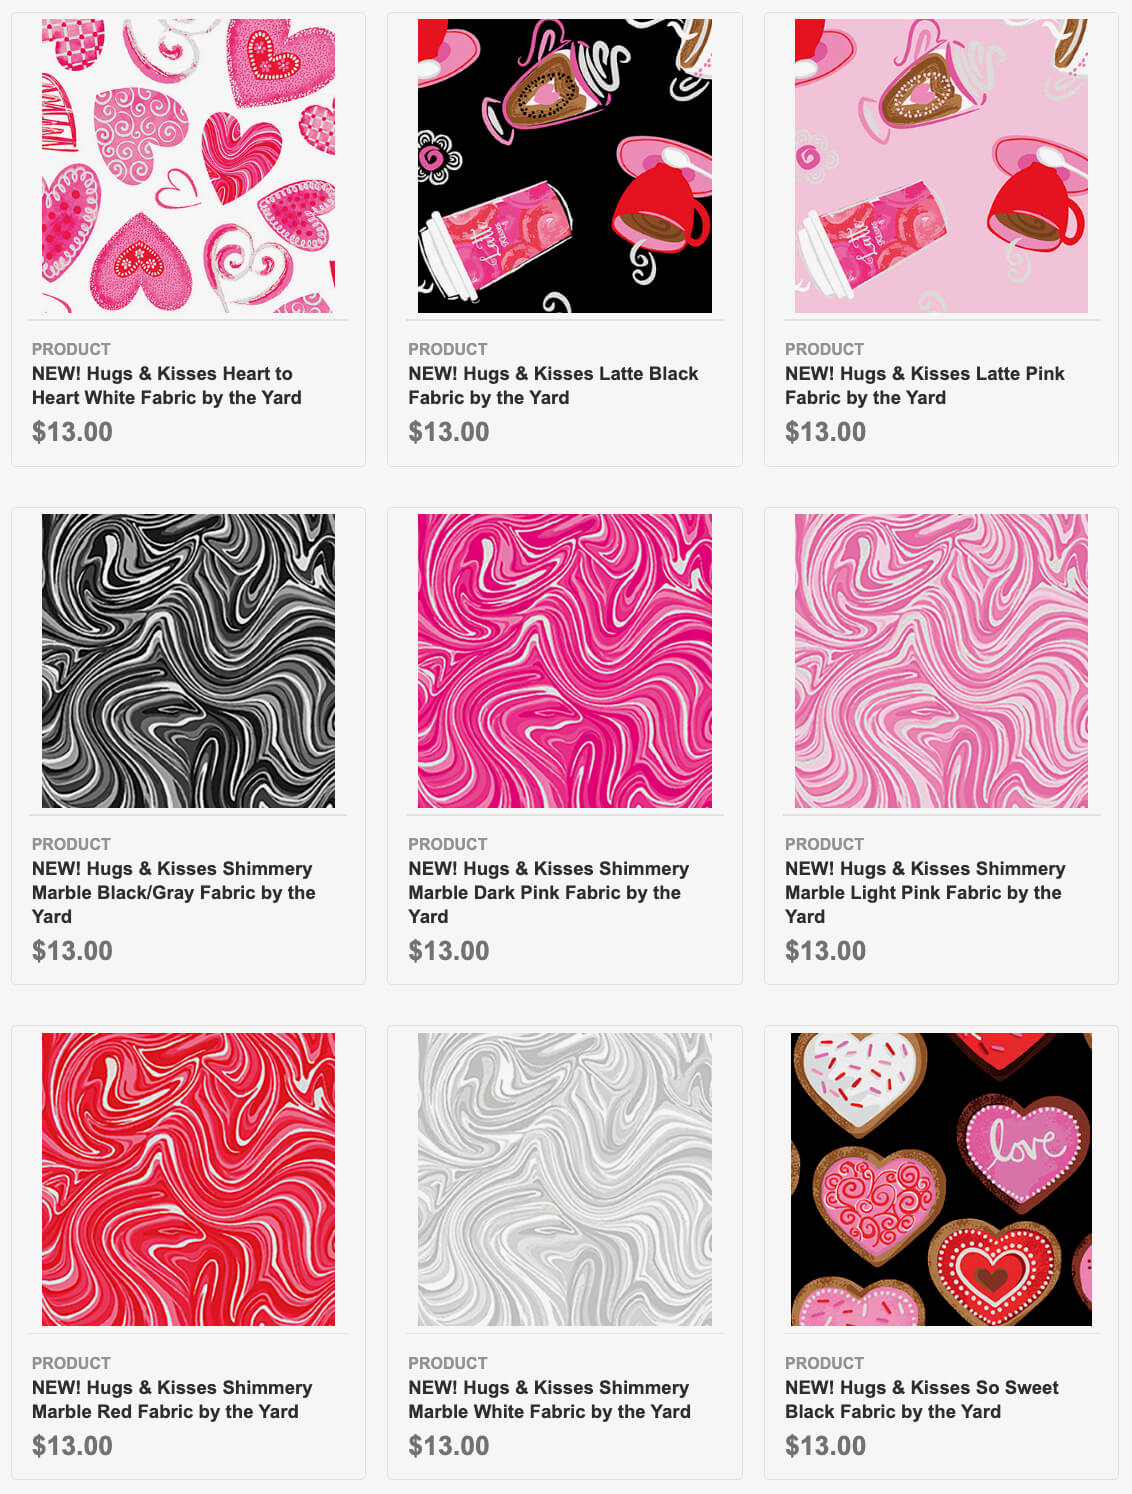 Valentines Day Fabric Available at Nancy Zieman Productions at ShopNZP.com